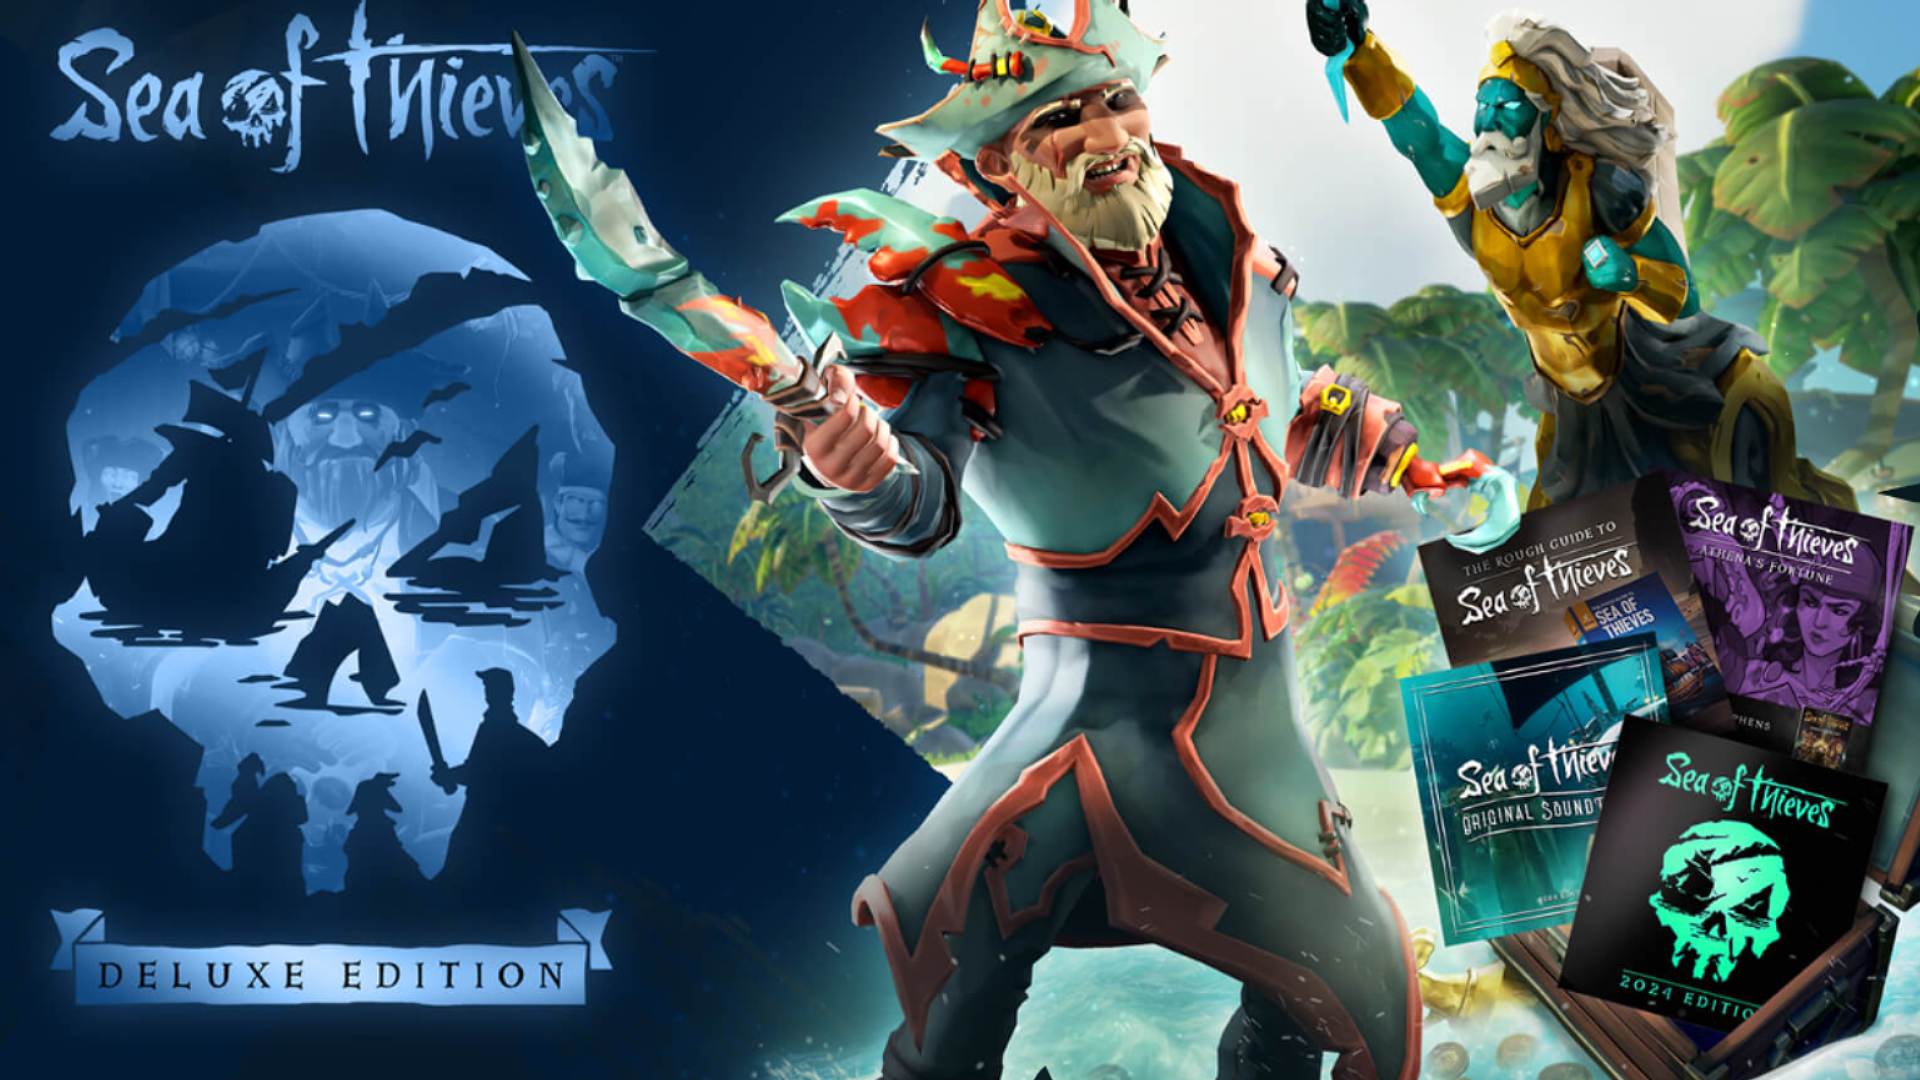 Sea of Thieves Deluxe edtion art from Rare website